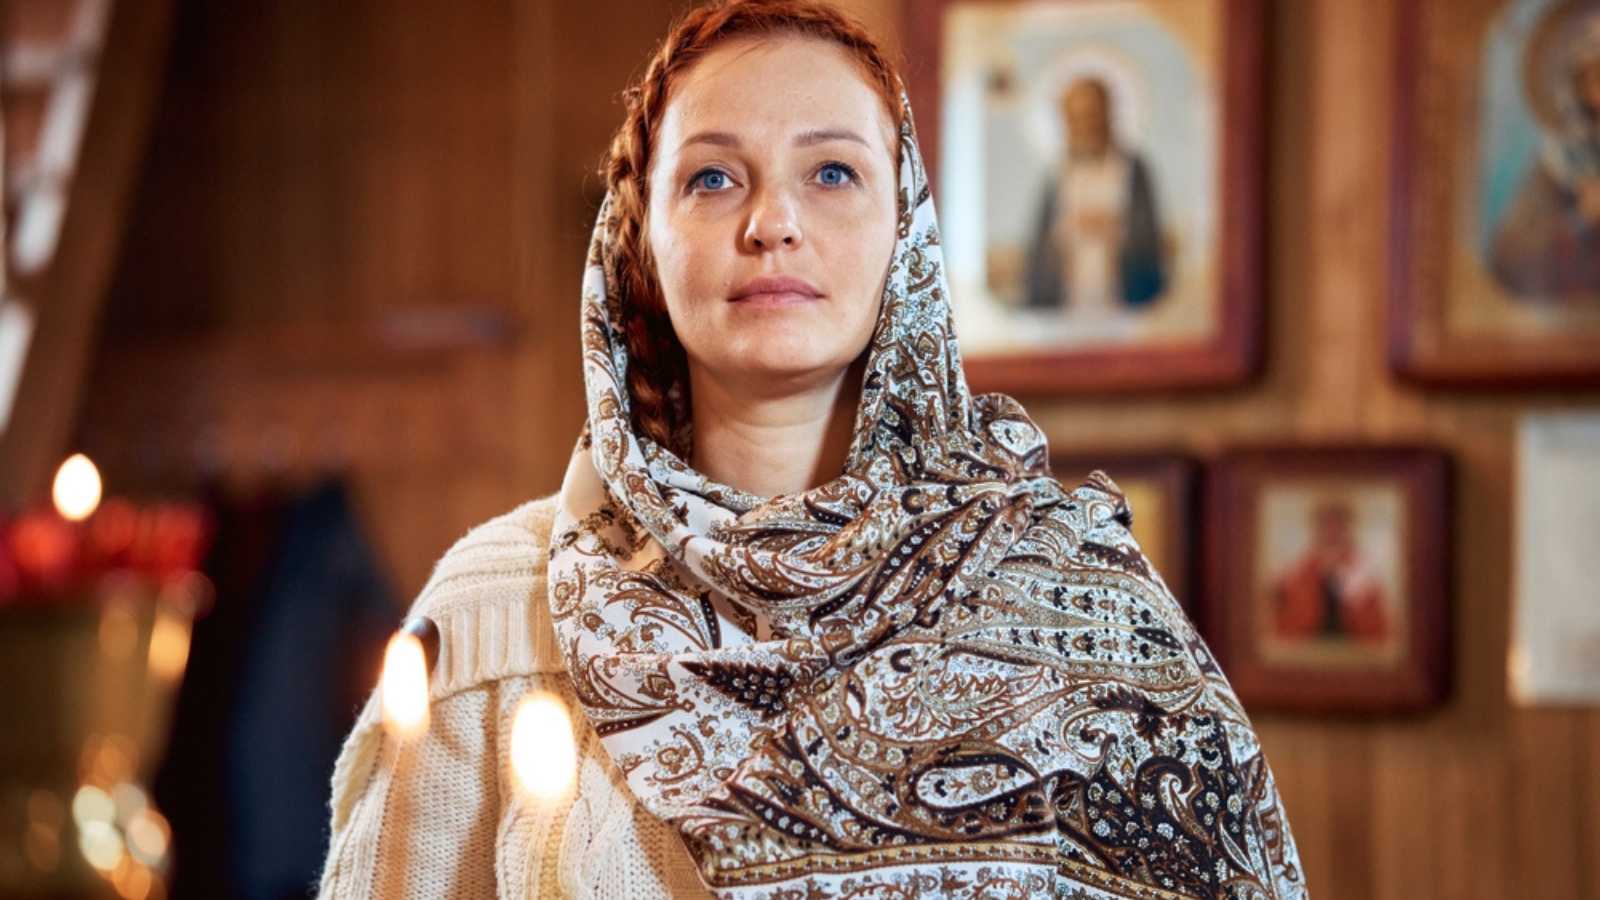 a young woman in a headscarf prays in an Orthodox church and puts candles in front of icons.